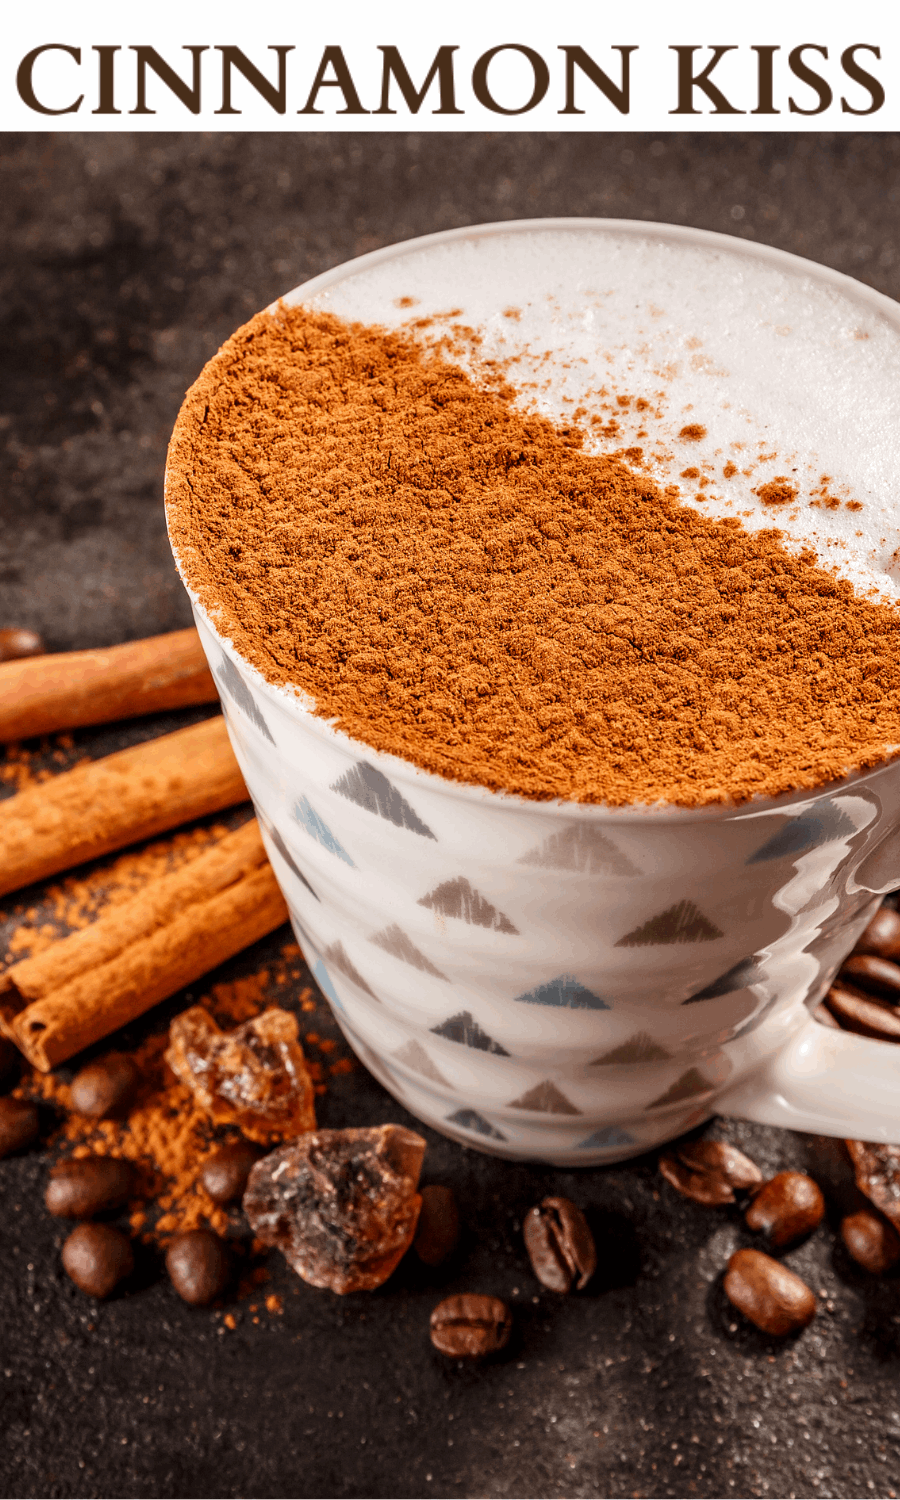 Picture of a coffee cup half dusted with cinnamon sitting among cinnamon sticks and coffee beans